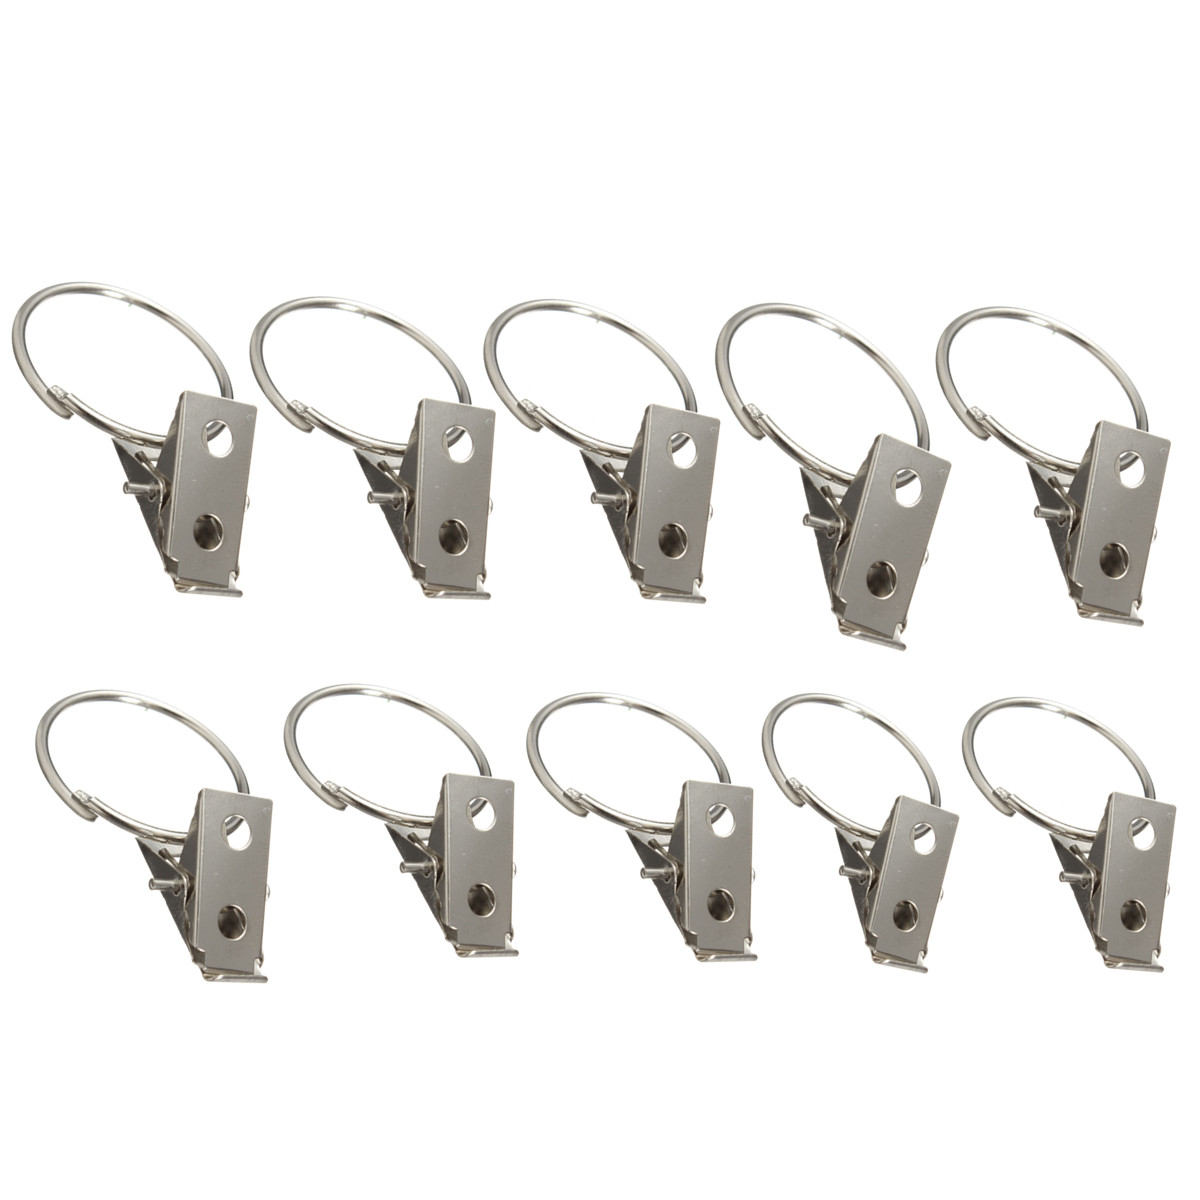 Silver-Chrome-Window-Curtain-Clips-Rings-Pole-Rod-Voile-Drapery-1024829